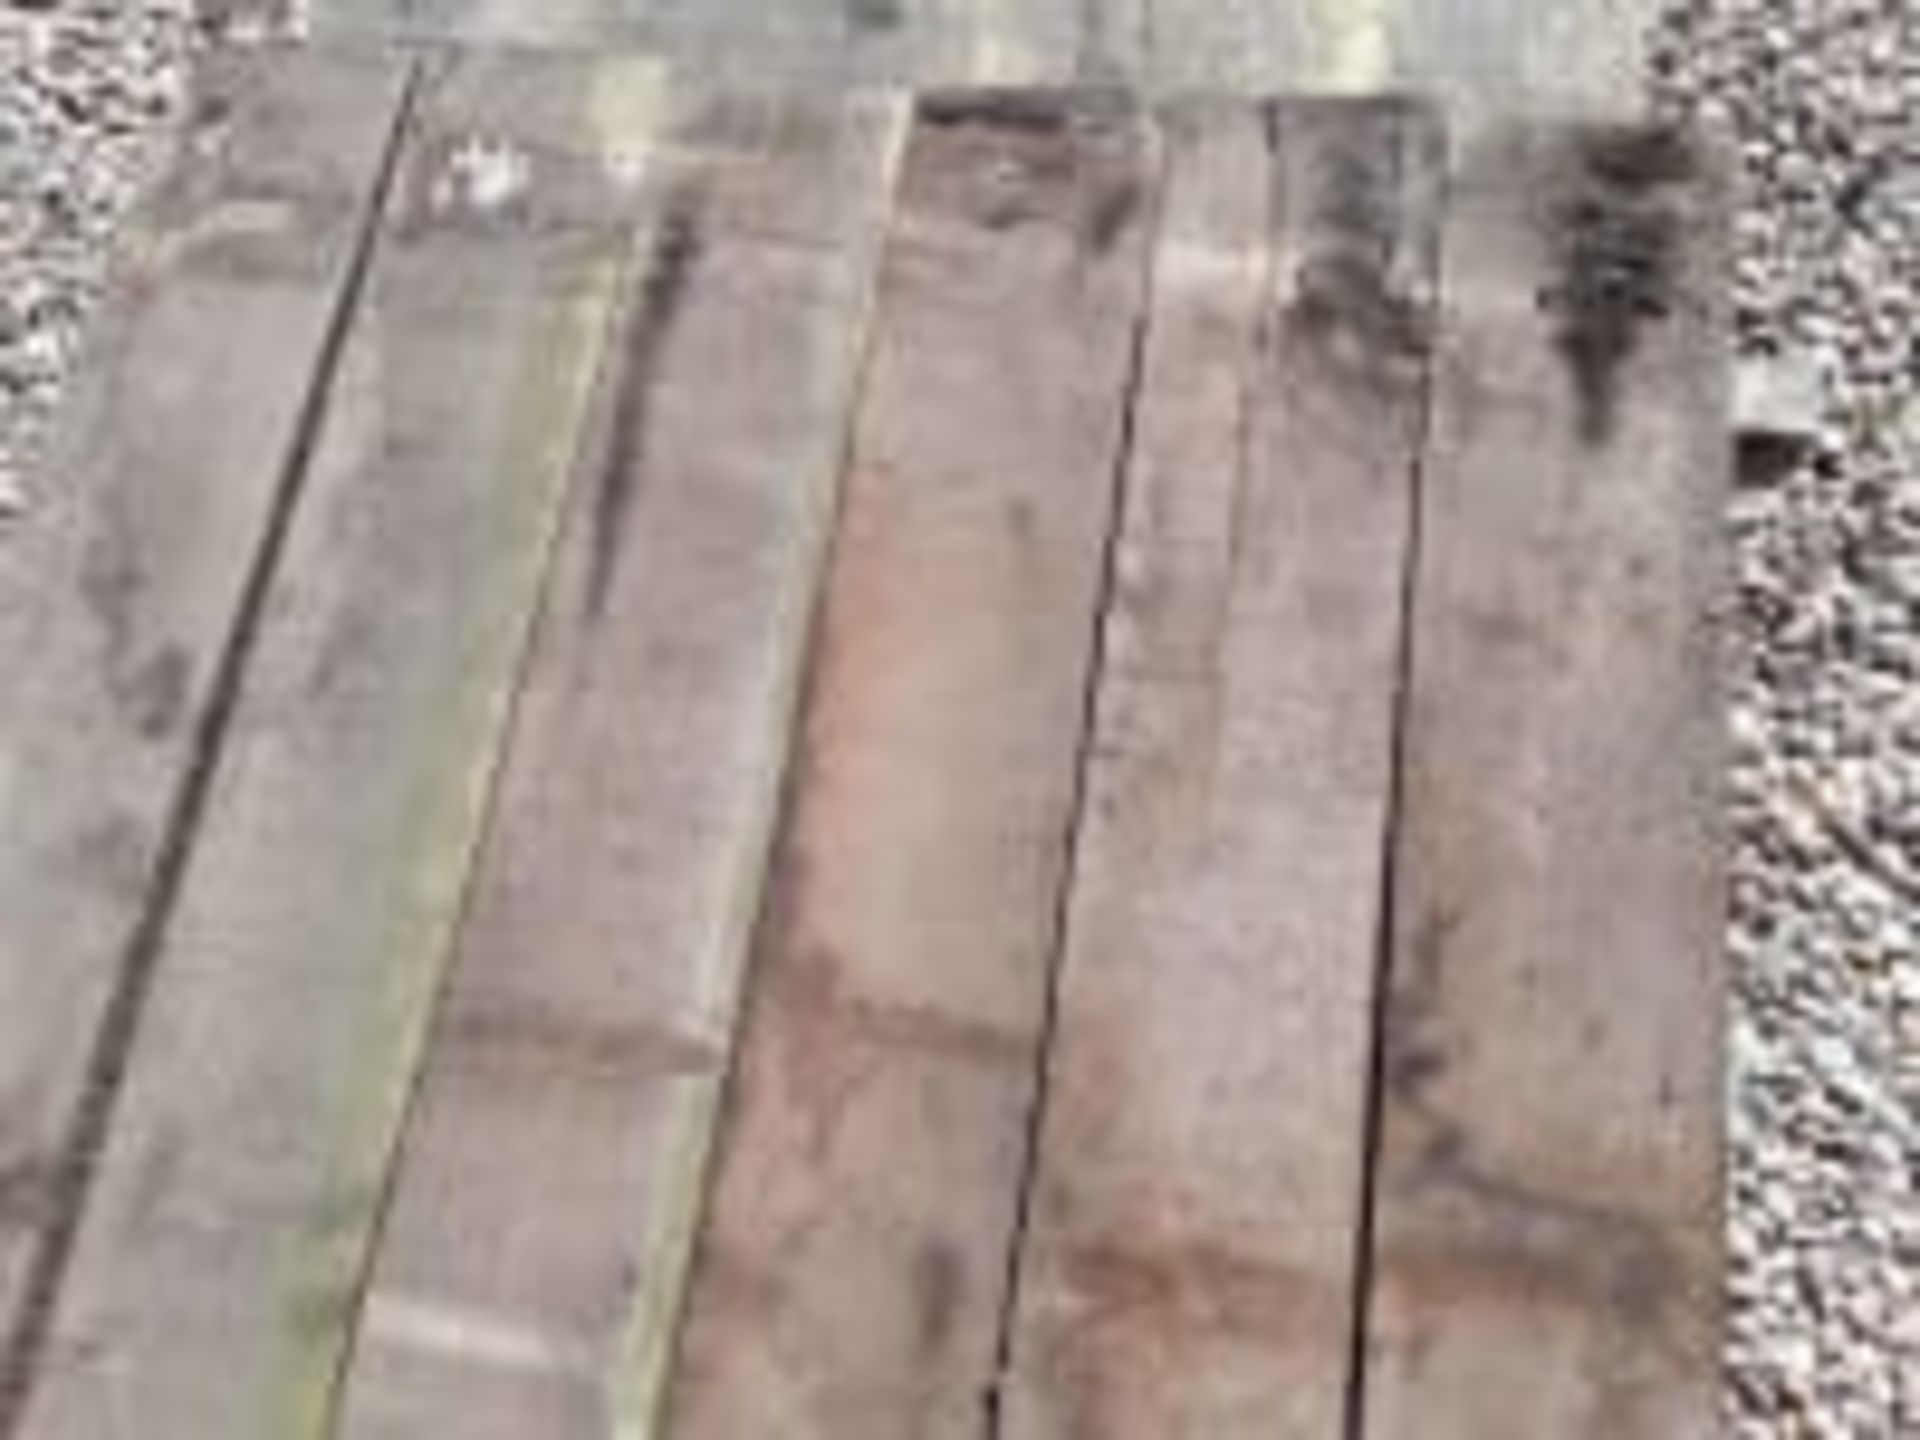 18 x Hardwood Air Dried Sawn Timber English Oak Square Edged Boards / Slabs - Image 6 of 8